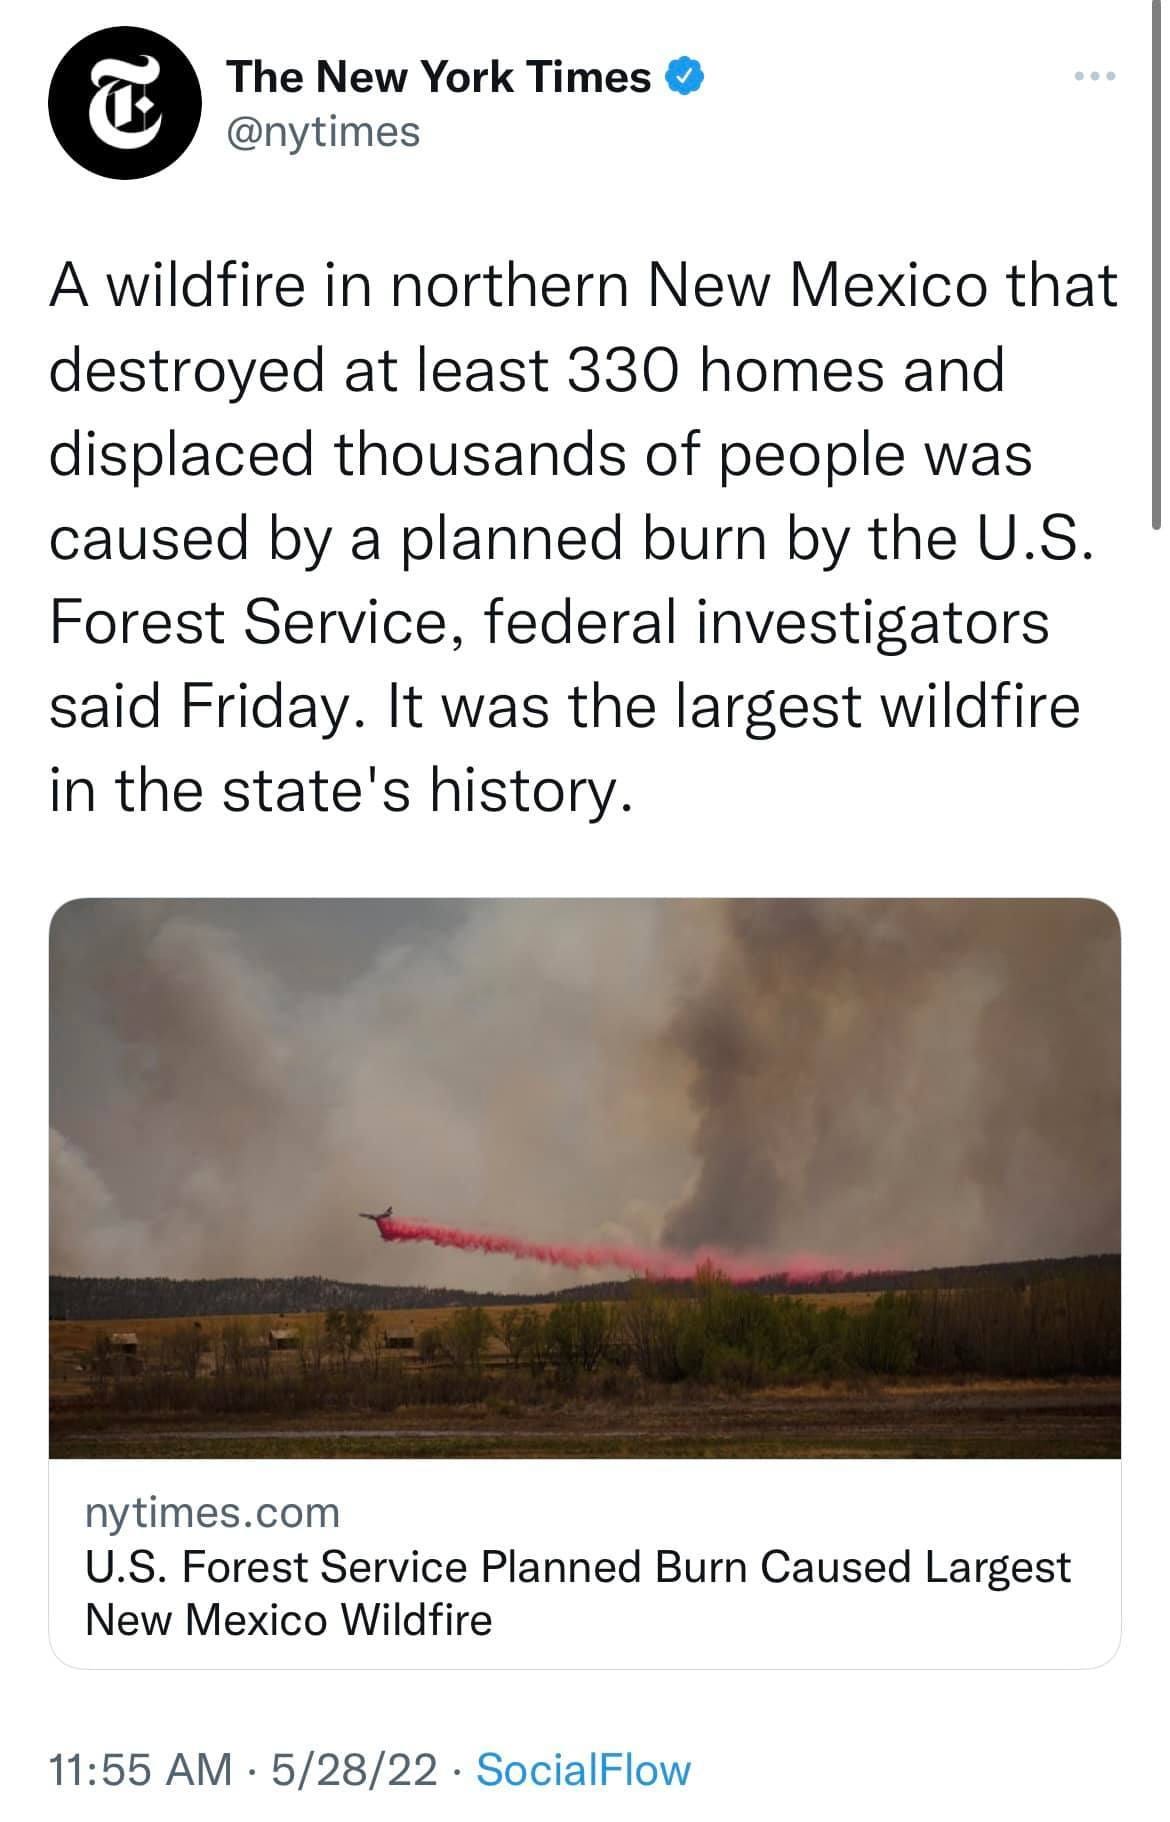 May be an image of fire, outdoors and text that says 'The New York Times @nytimes A wildfire in northern New Mexico that destroyed at least 330 homes and displaced thousands of people was caused by a planned burn by the U.S. Forest Service, federal investigators said Friday. It was the largest wildfire in the state' history. nytimes.com U.S. Forest Service Planned Burn Caused Largest New Mexico Wildfire 11:55 AM 5/28/22 SocialFlow'